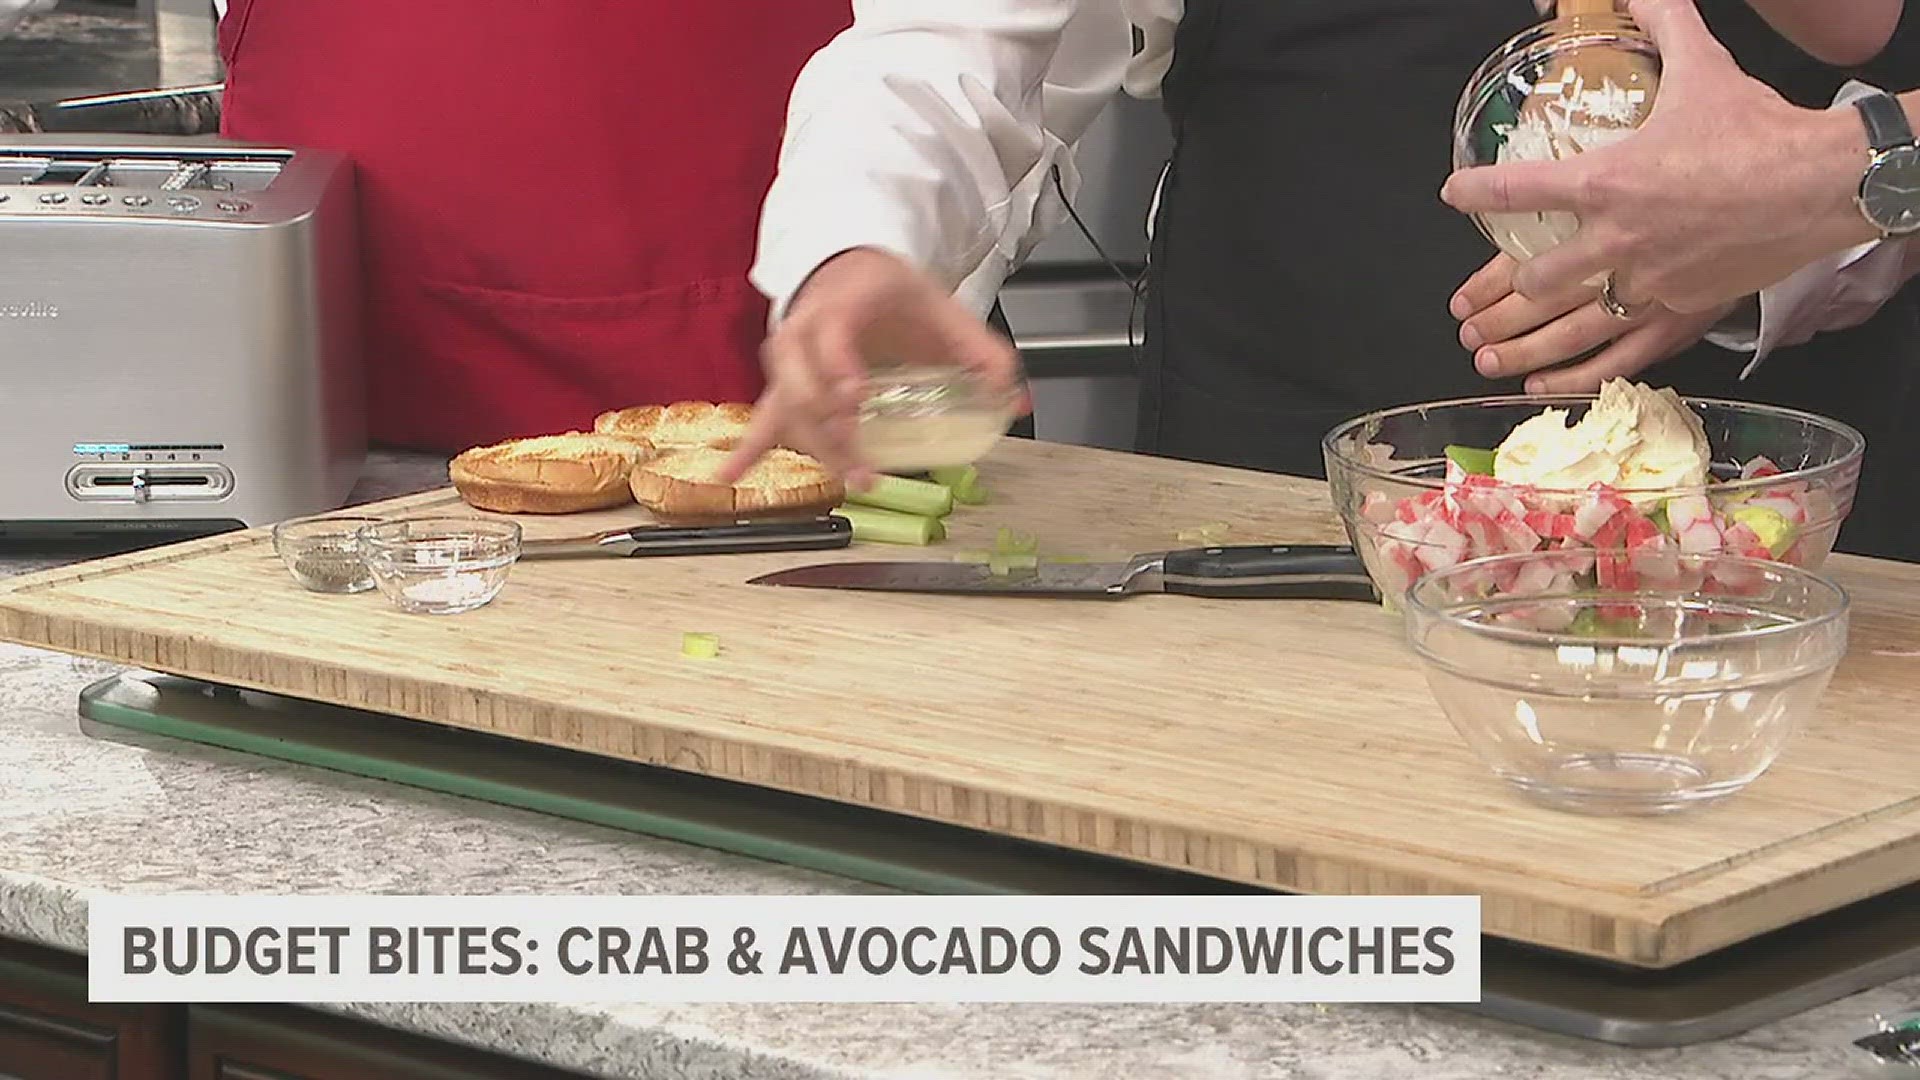 Our News 8 crew takes a fancy lobster sandwich and makes it work on a budget.